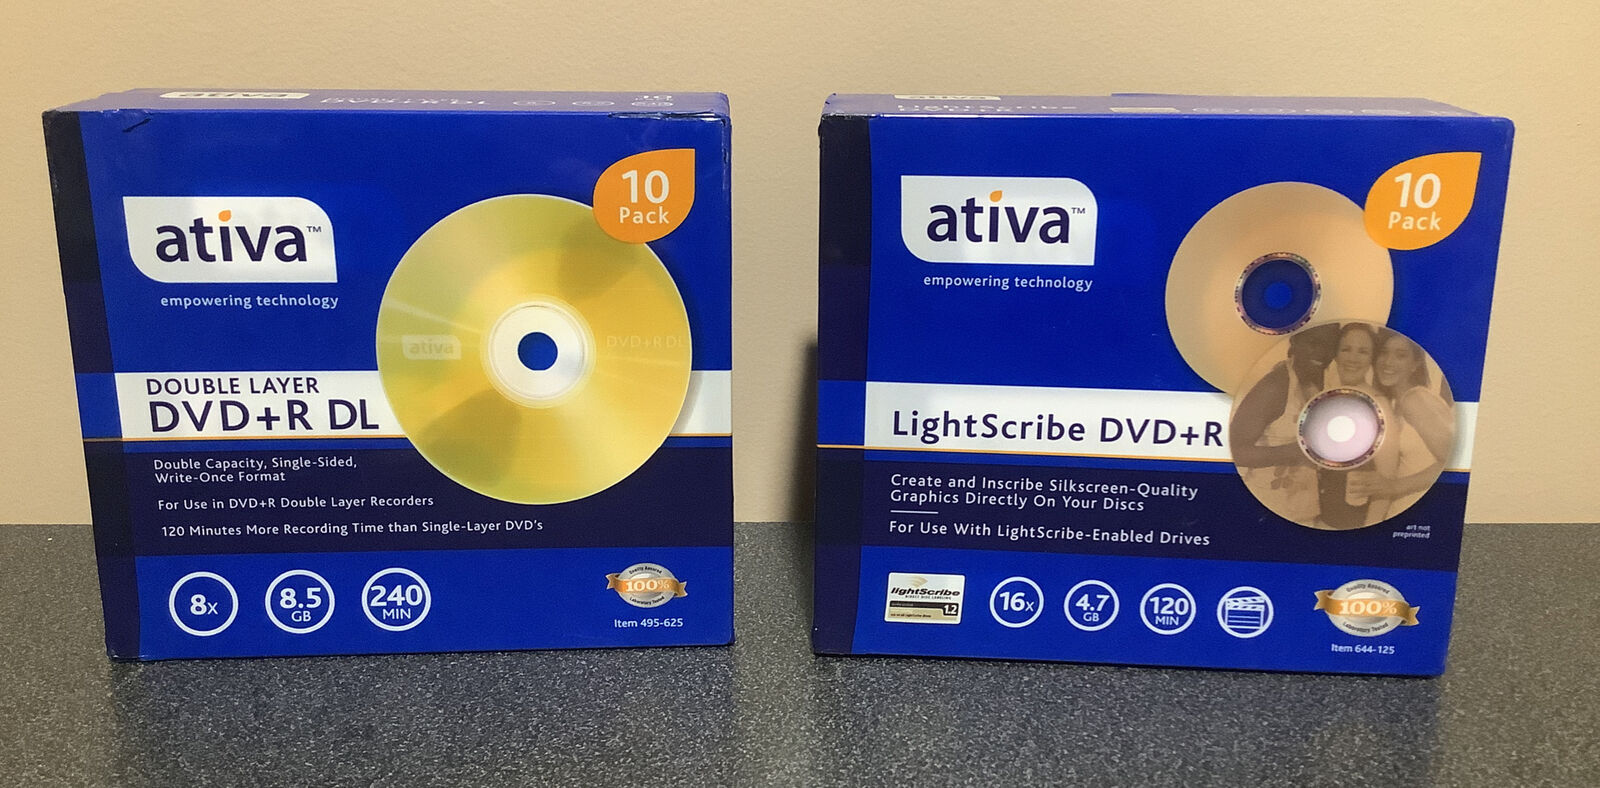 Ativa Double Layer DVD+R DL 10 Pack PLUS  Ativa DVD +R 10 pack BOTH PACKS 